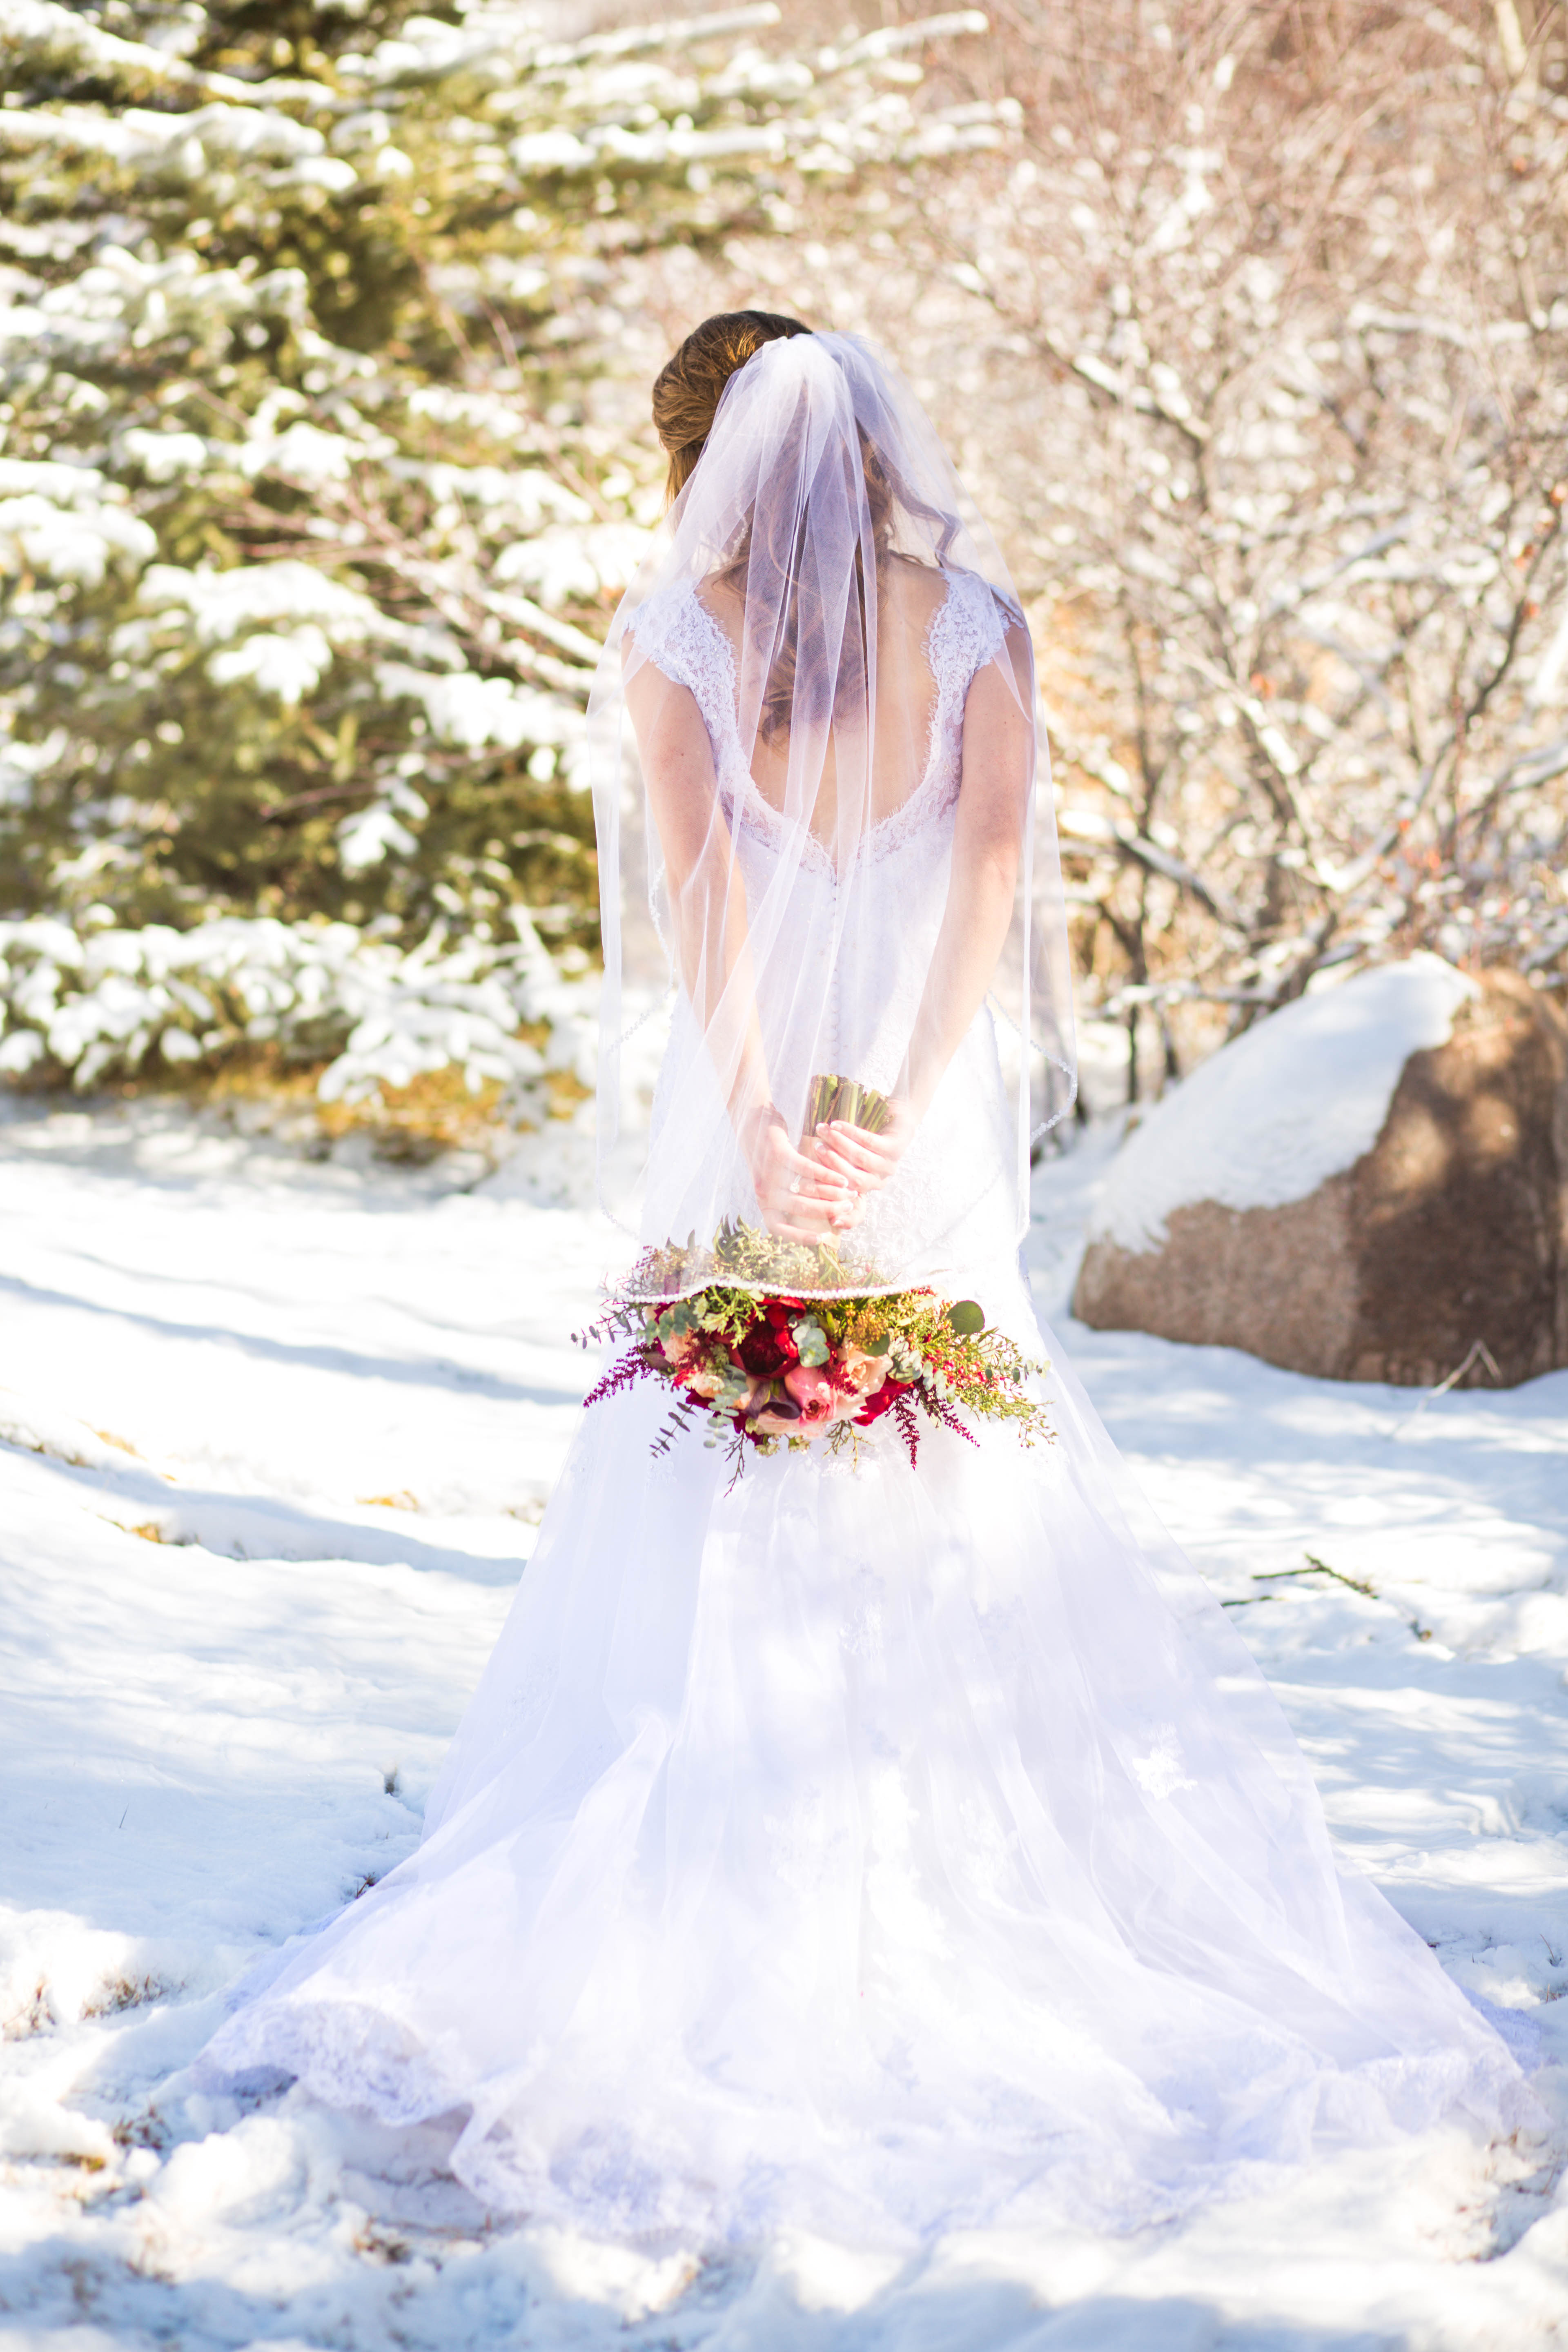 Bride stands in the snow while holding her bouquet behind her back